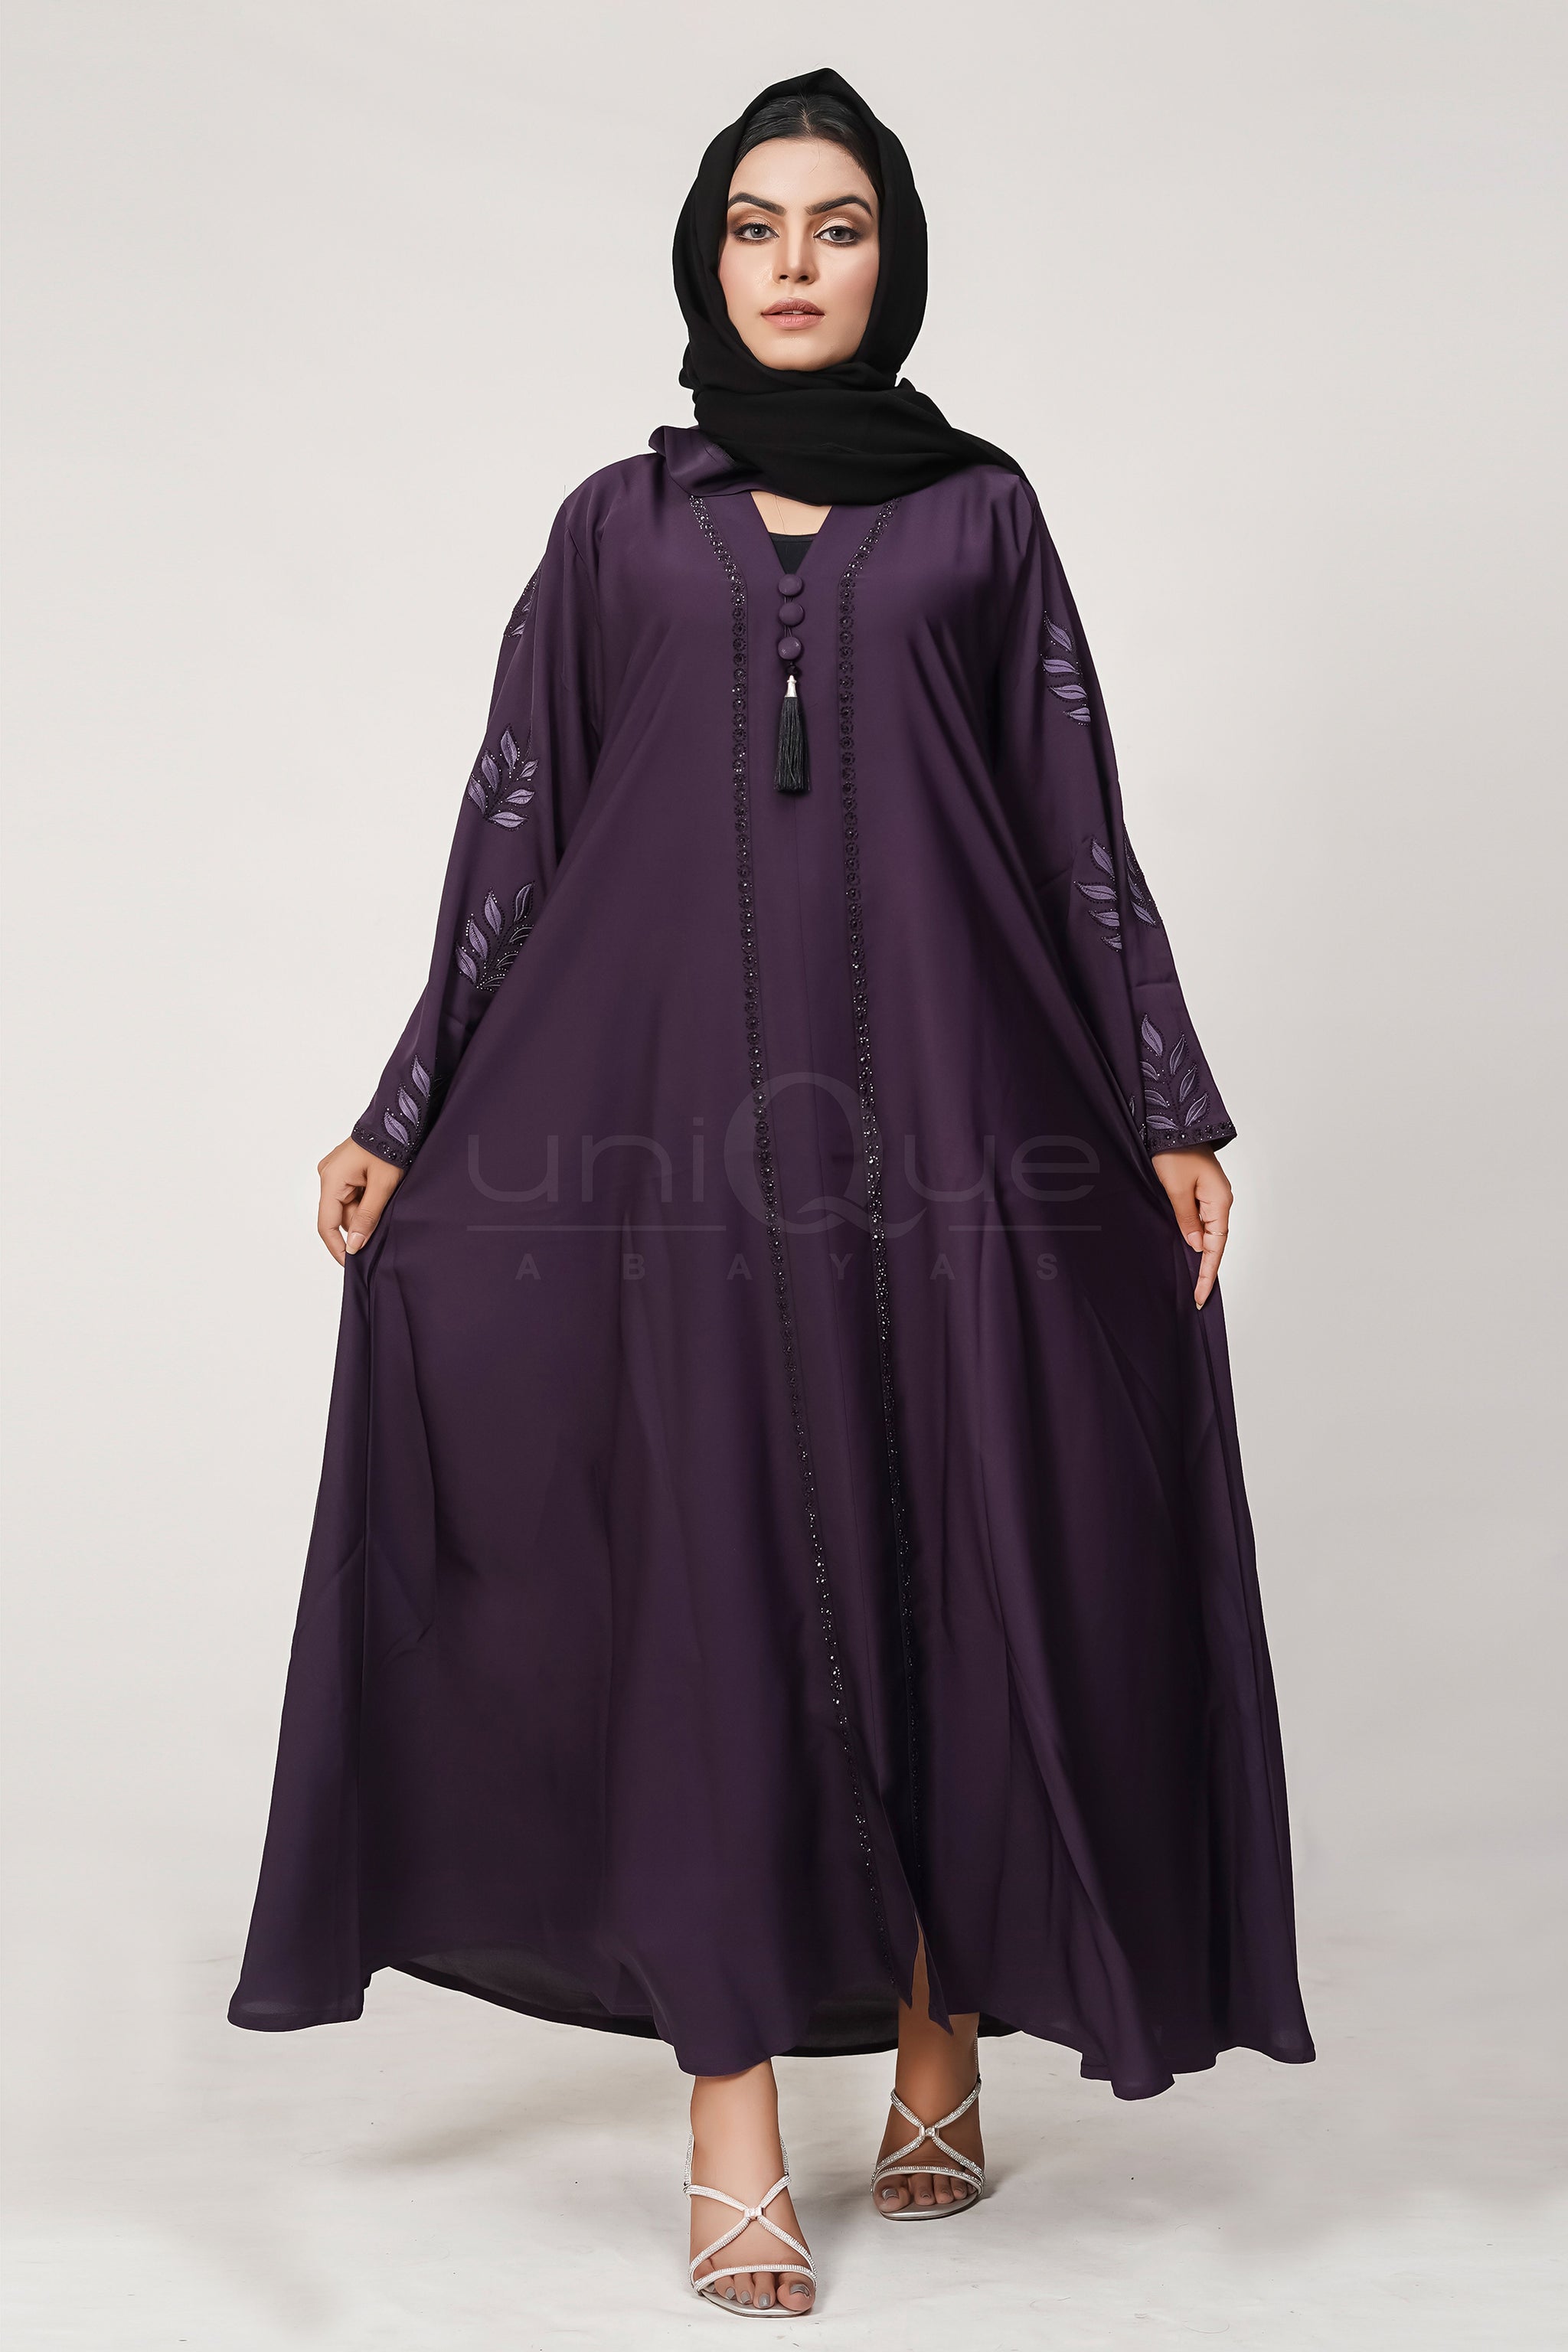 Embroidered Stone Purple Abaya by Uniquewallart Abaya for Women, Front Side View